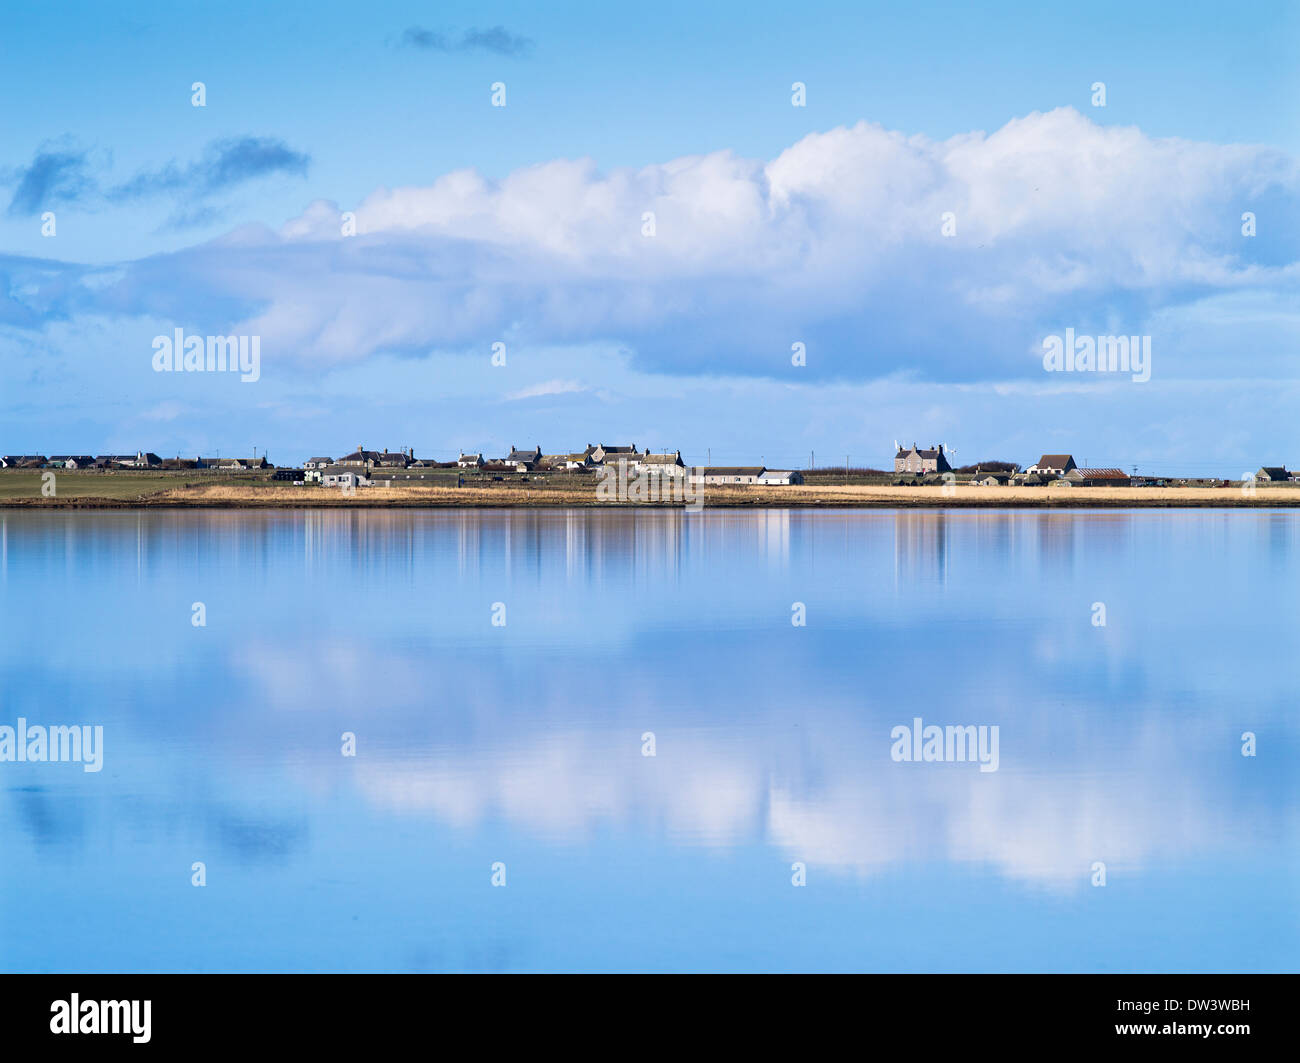 dh Cata Sand SANDAY ORKNEY Village houses sea inlet bay blue sky reflects Stock Photo